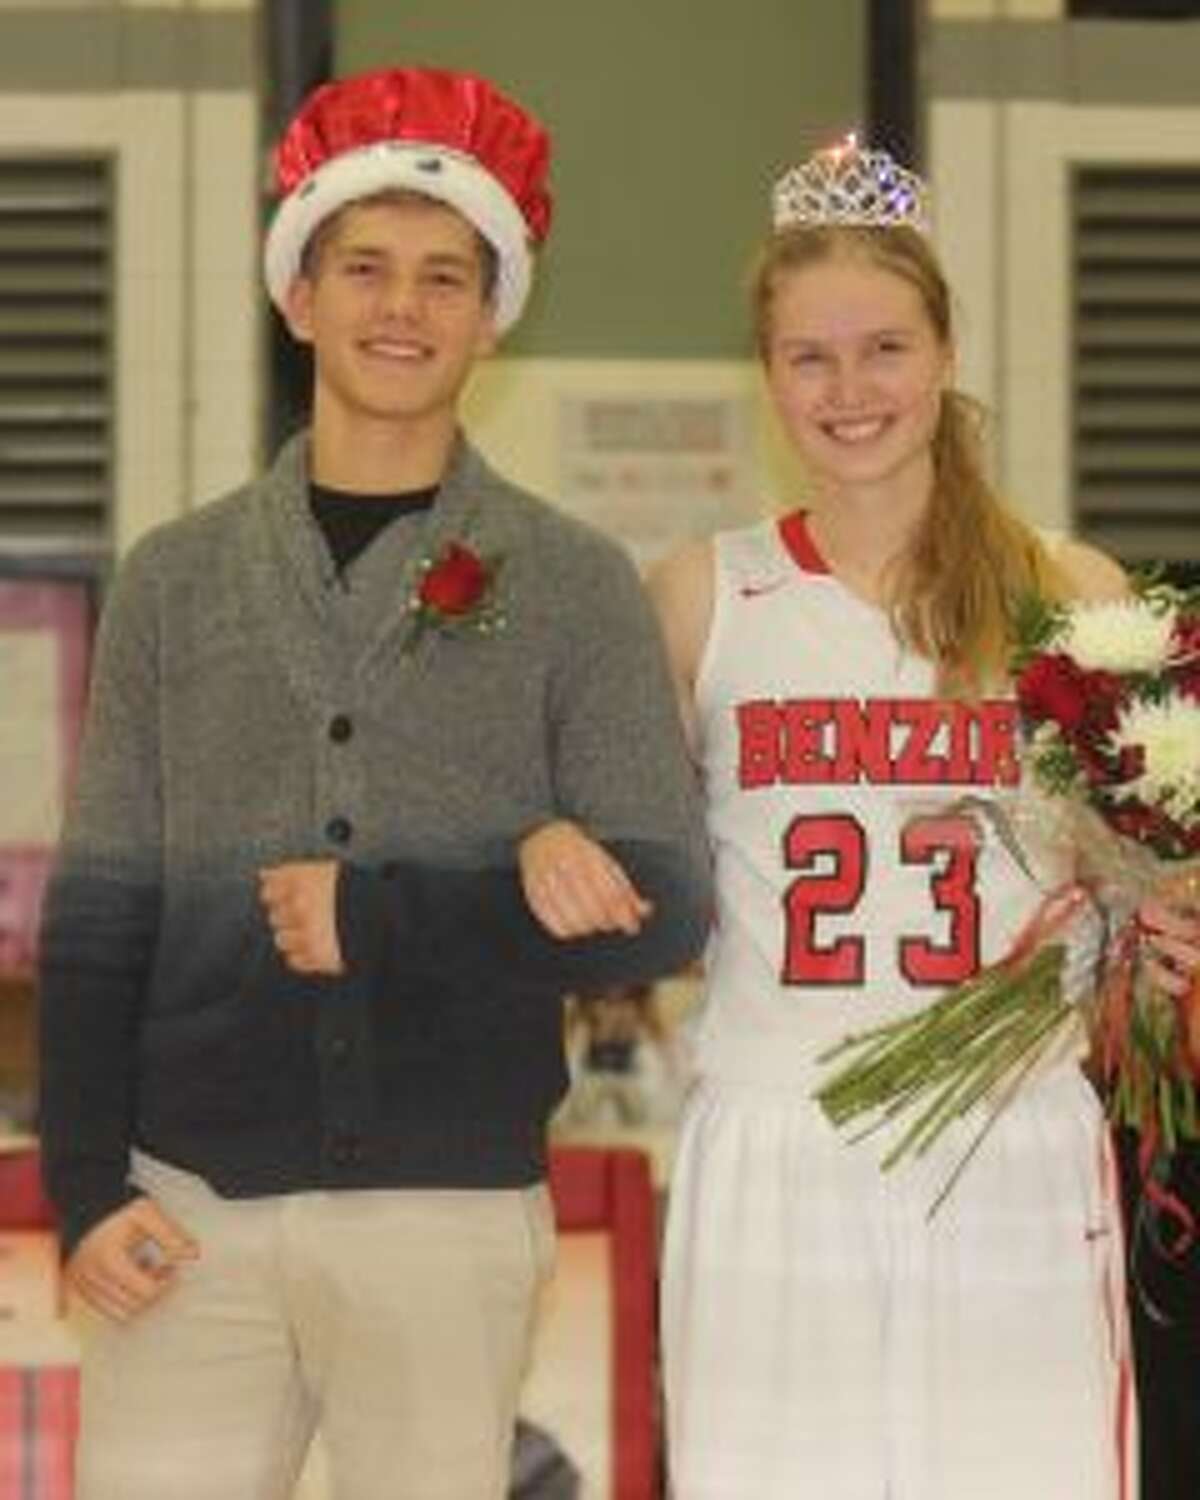 Thomas Rucki and Camilla Christiansen are crowned snowcoming king and queen.